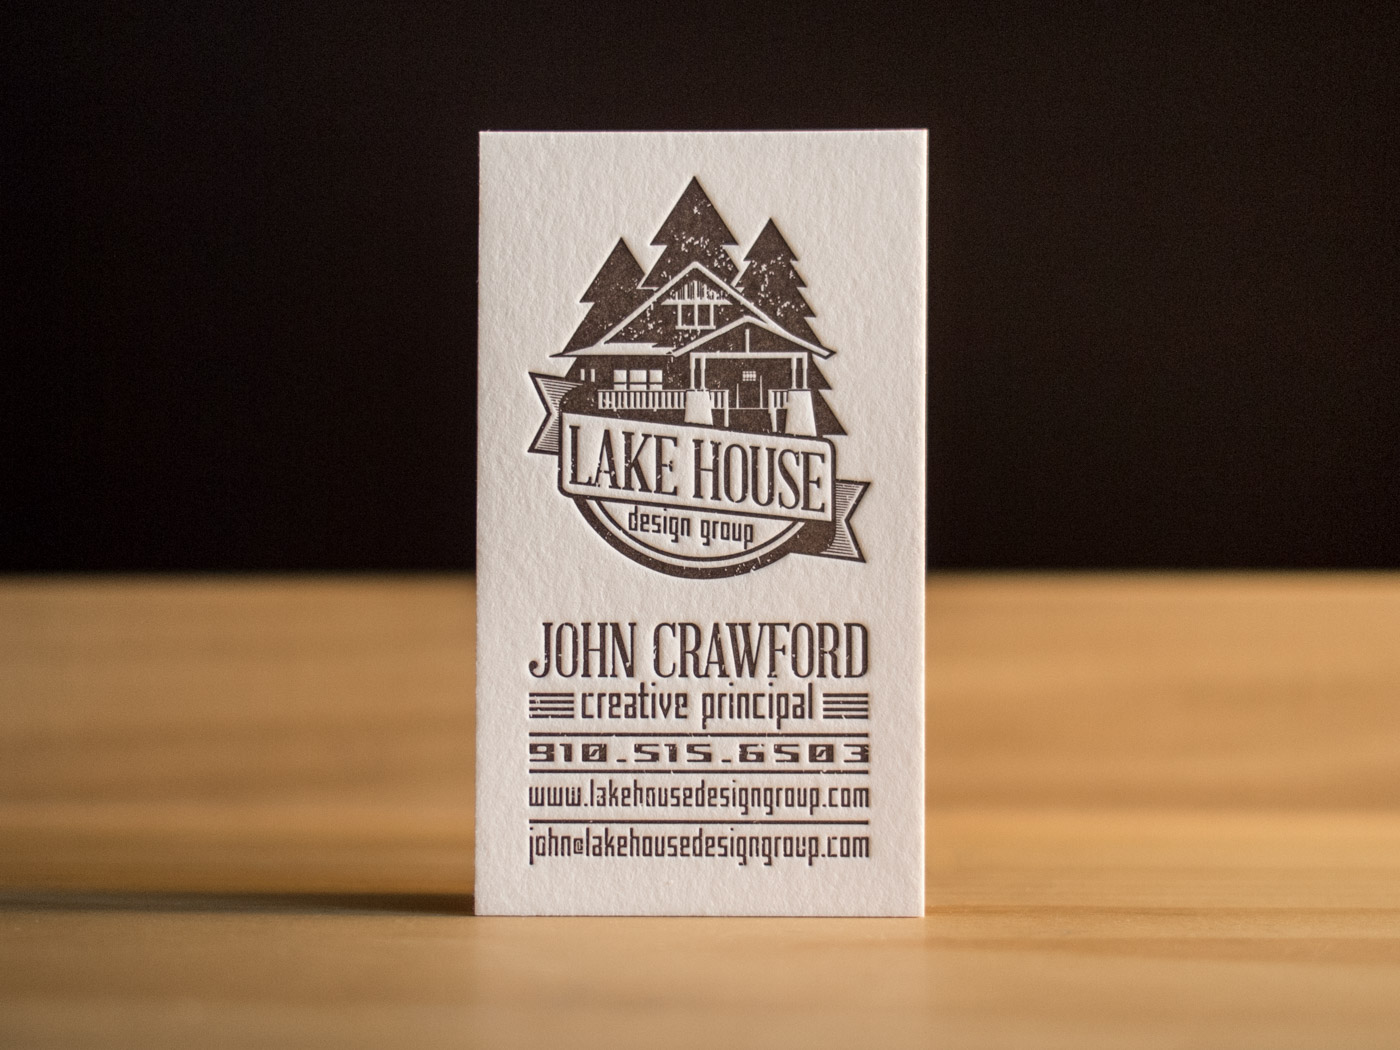 Lake House Design Group | Printed by Parklife Press